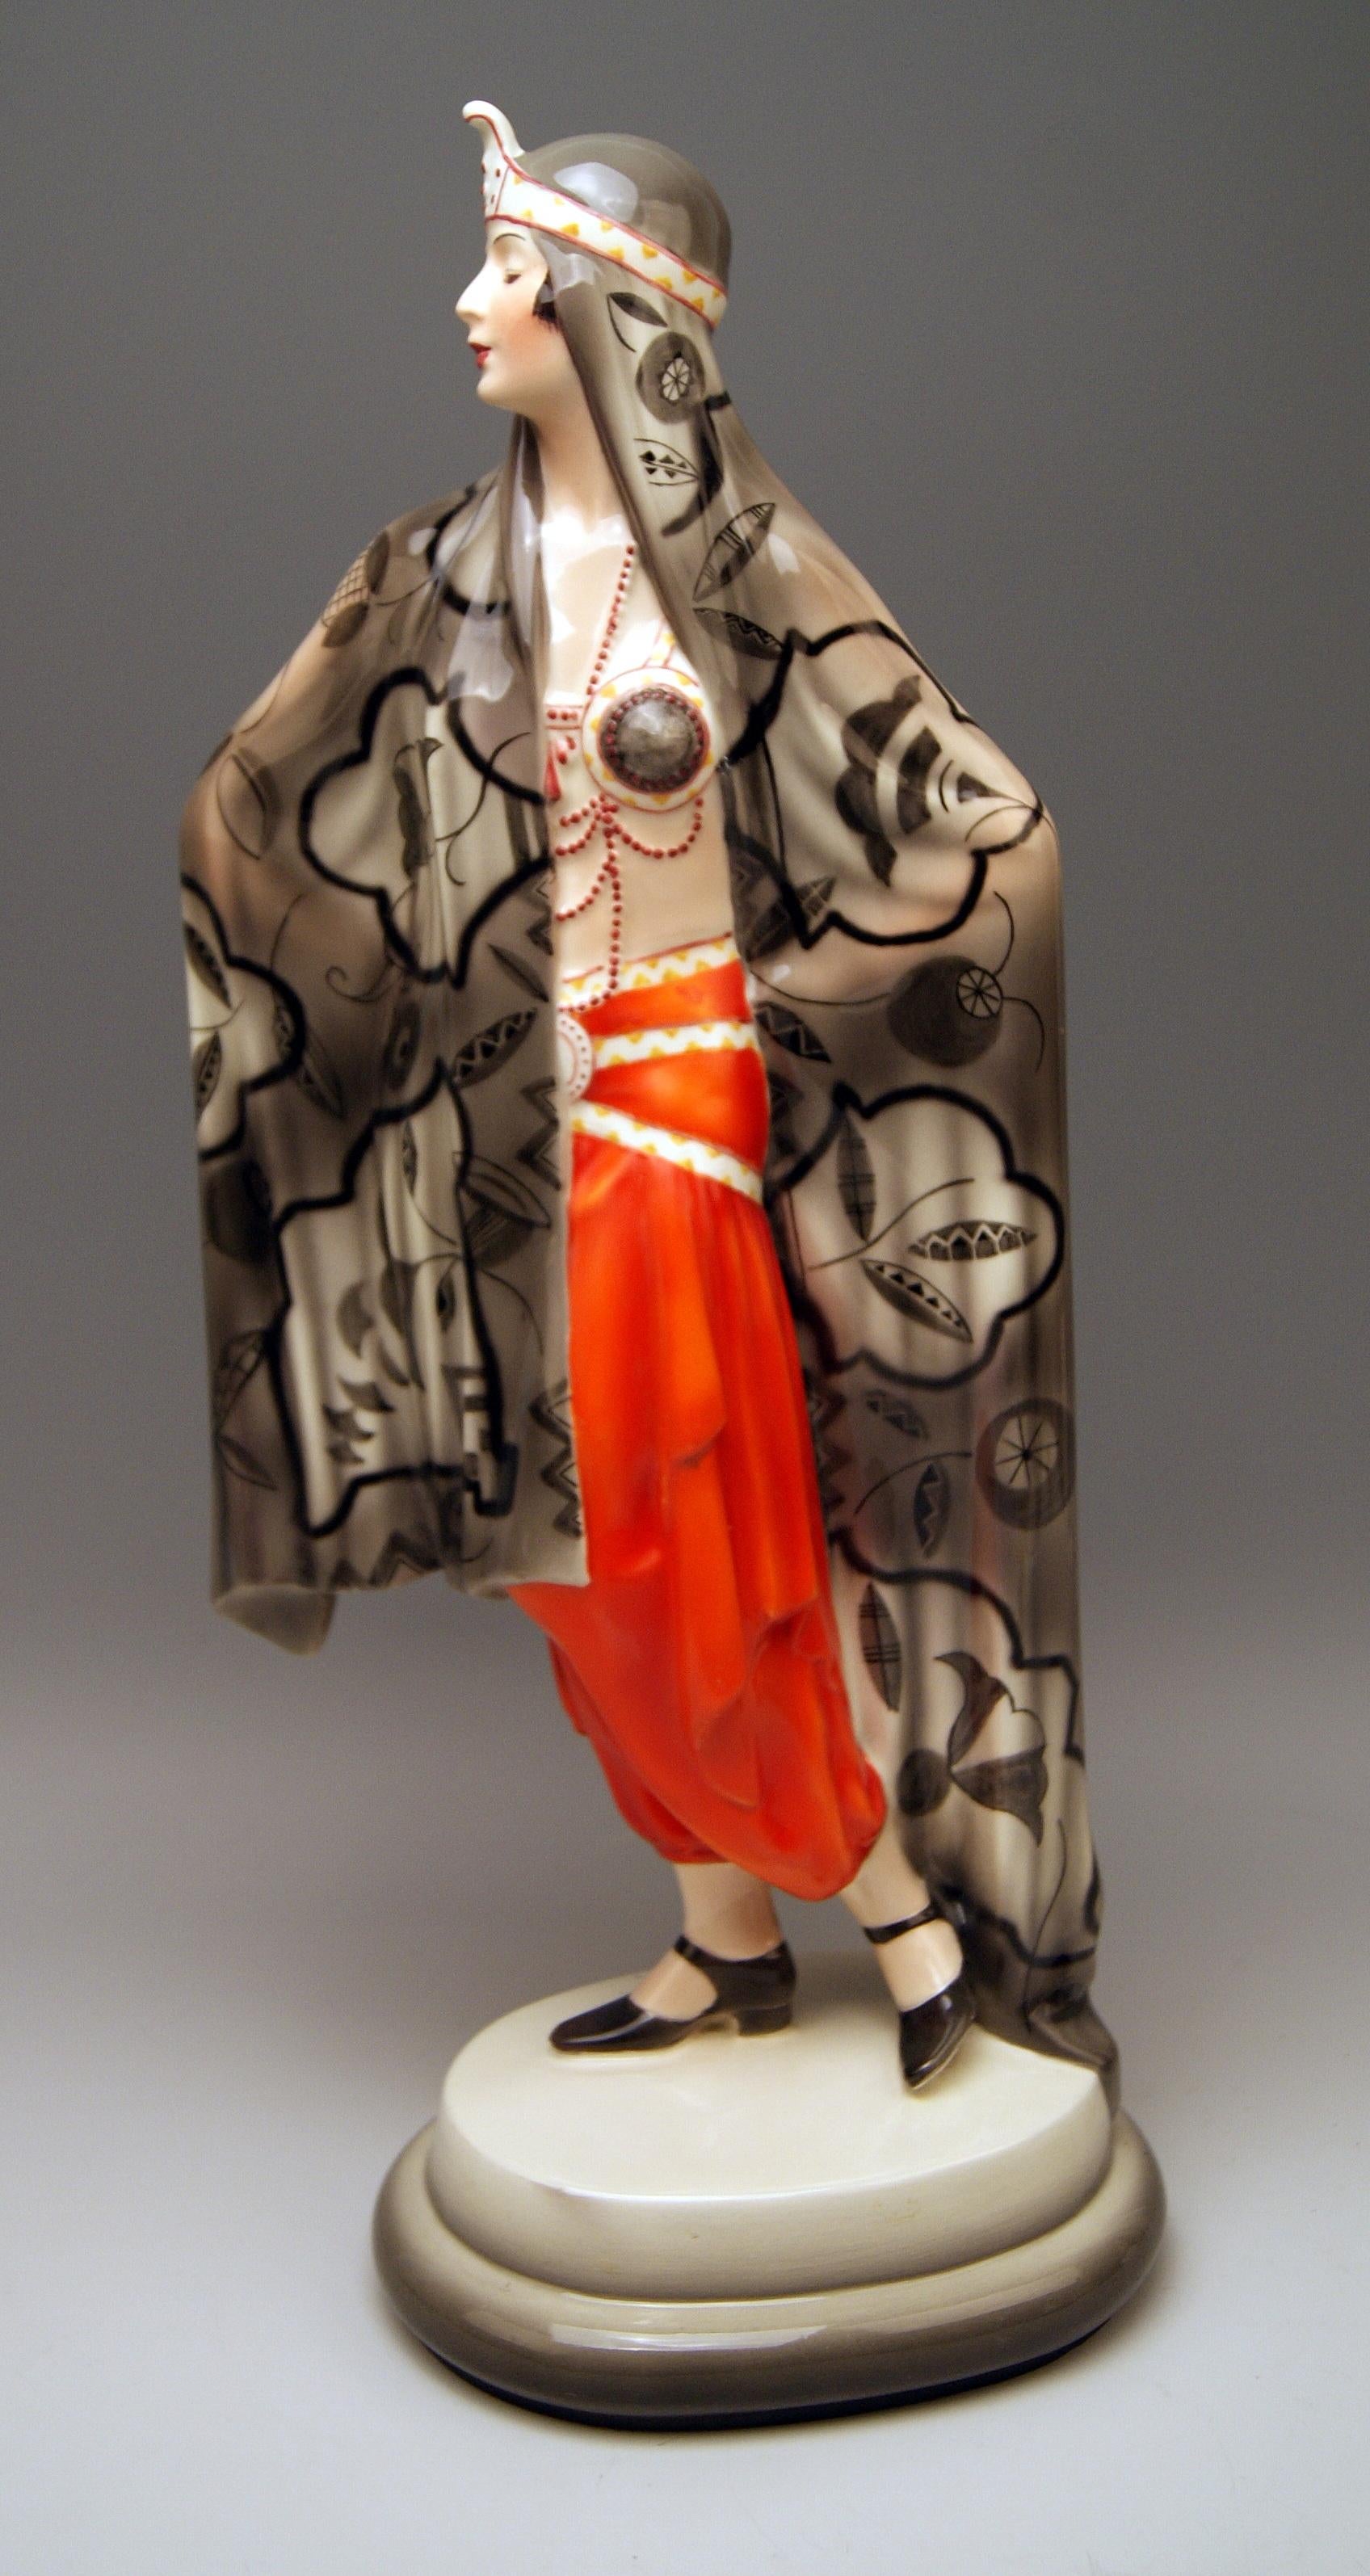 Female Oriental Figurine Wearing Costume: Odalisque (CALLED 'AIDA')

Designed by Josef LORENZL (1892-1950) / one of most important designers having been active for Goldscheider manufactory in period of 1920-1940 / designed, circa